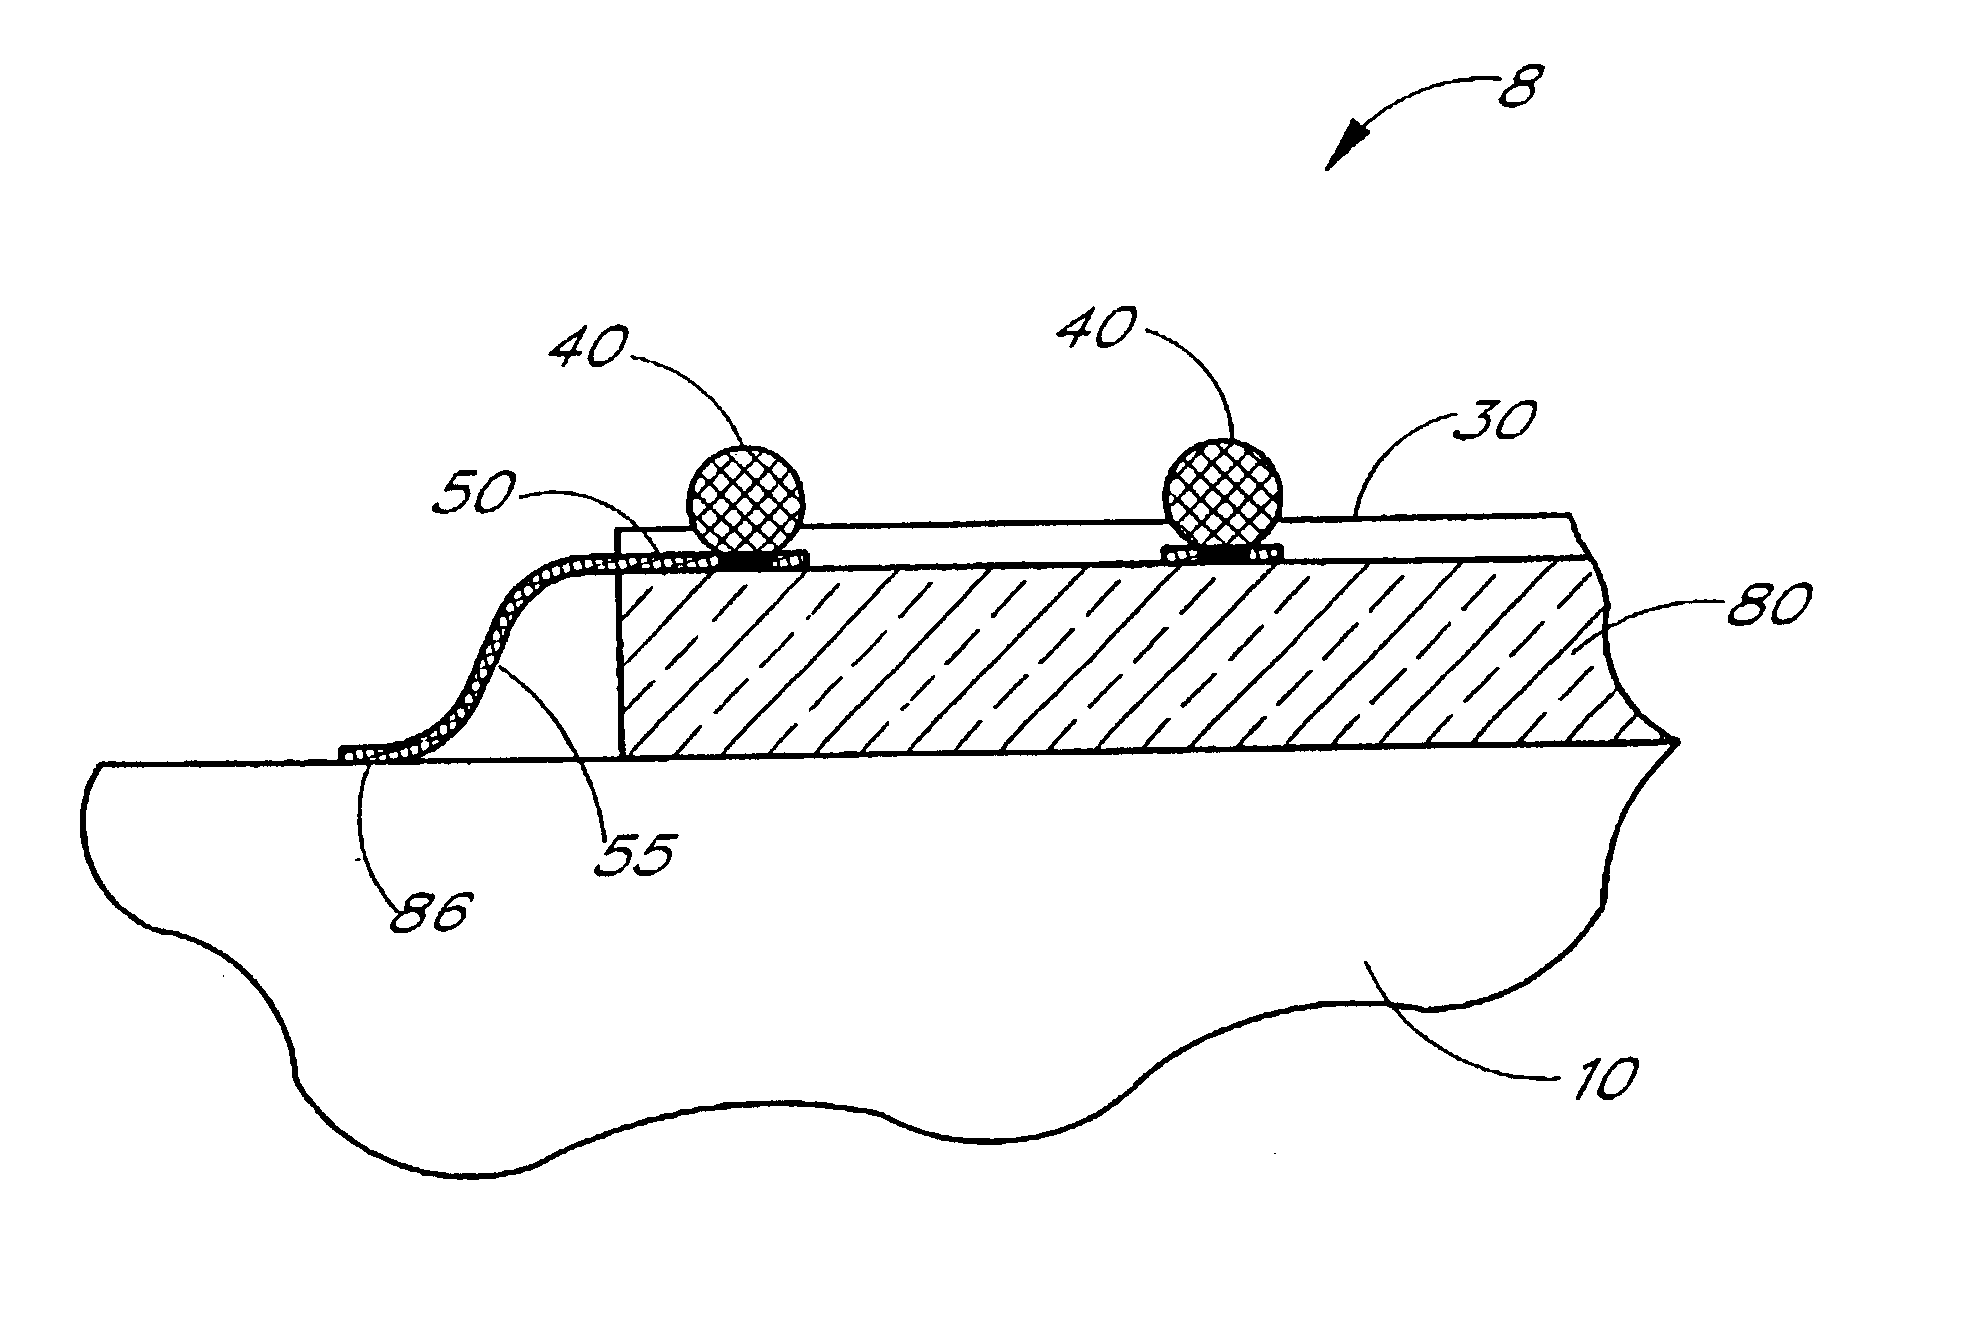 Method of making a flexible substrate with a filler material